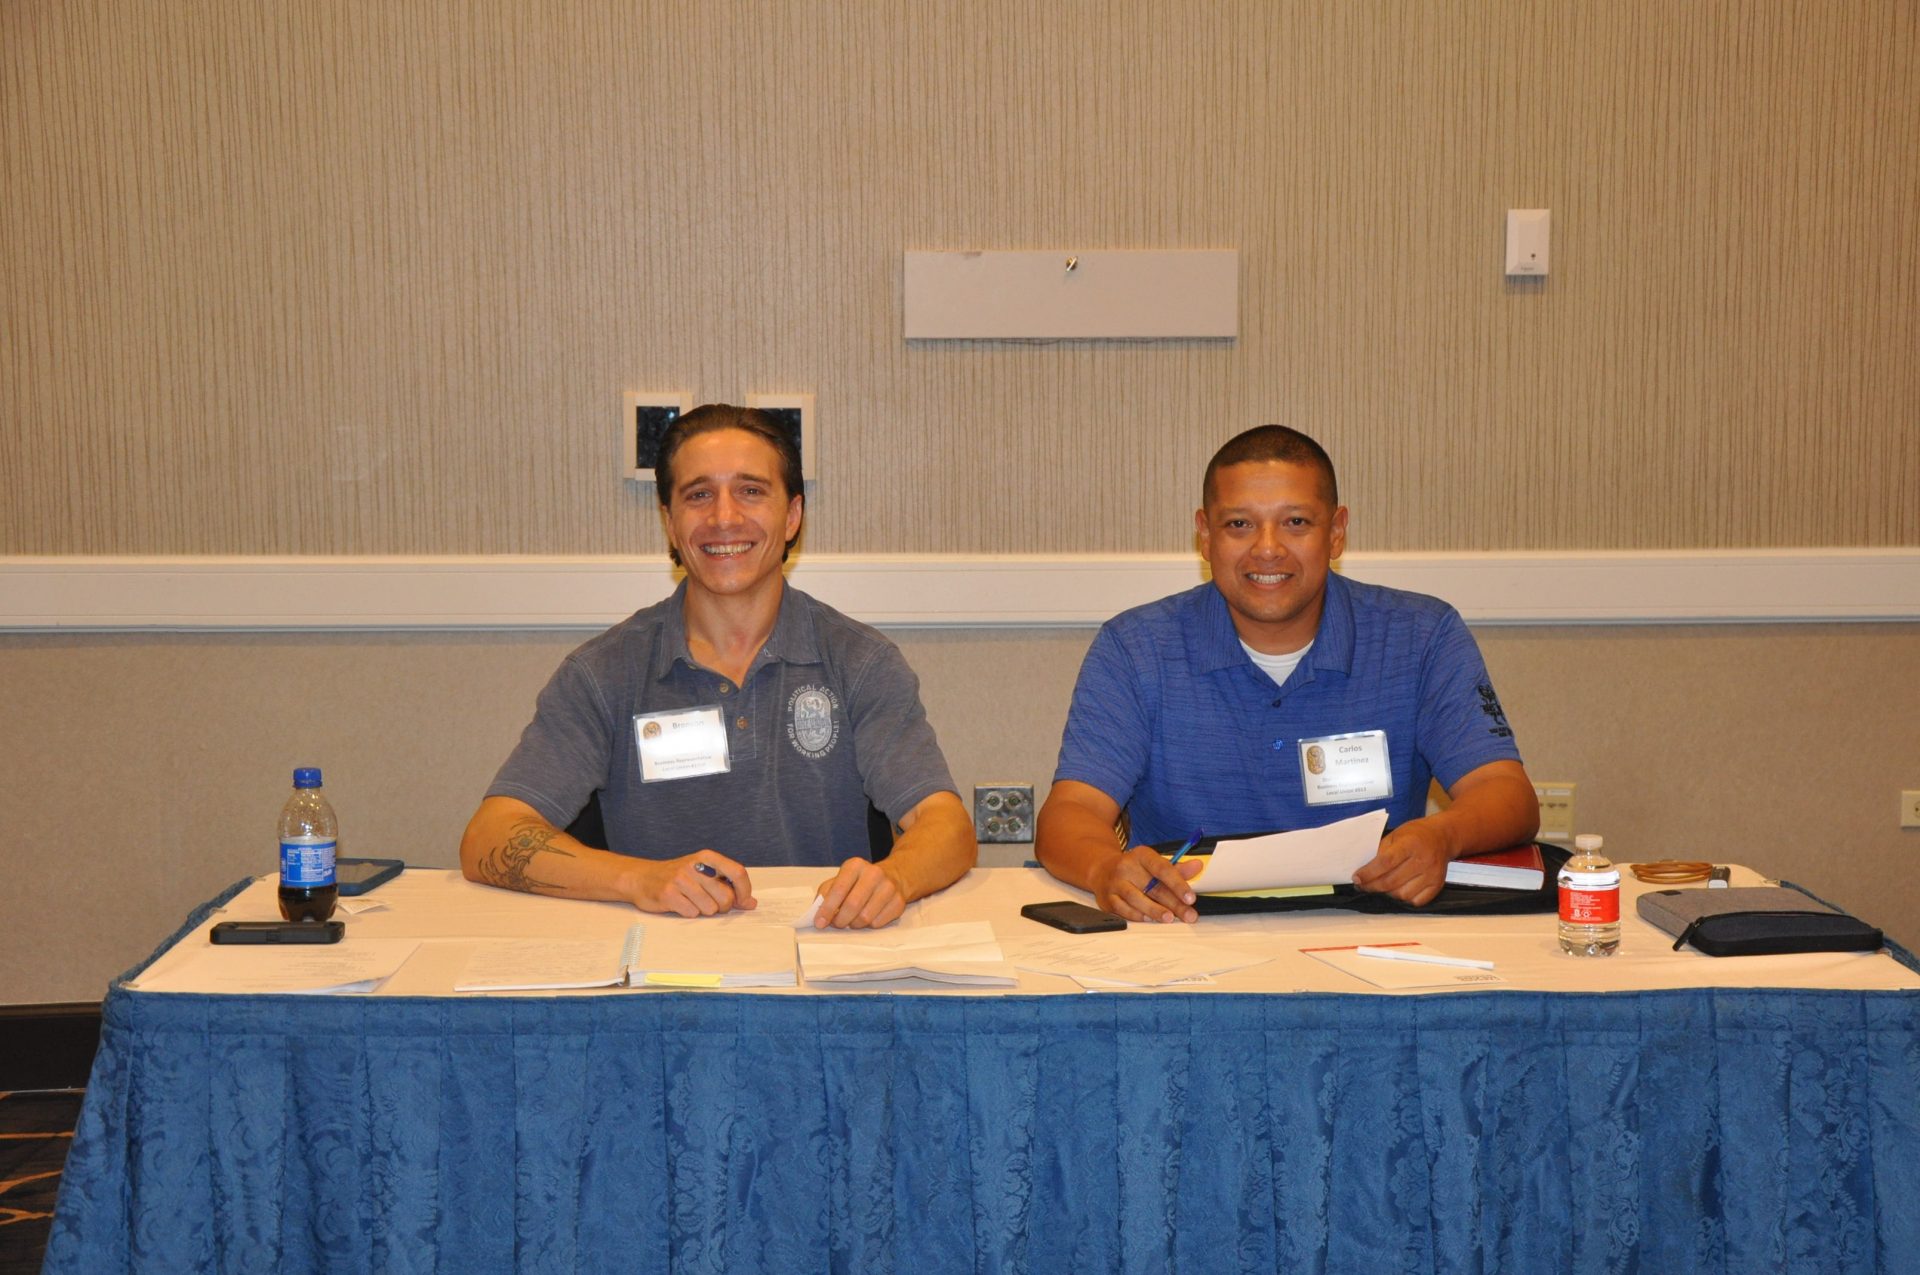 Image from the Gallery: Western Regional Conference – Las Vegas, NV